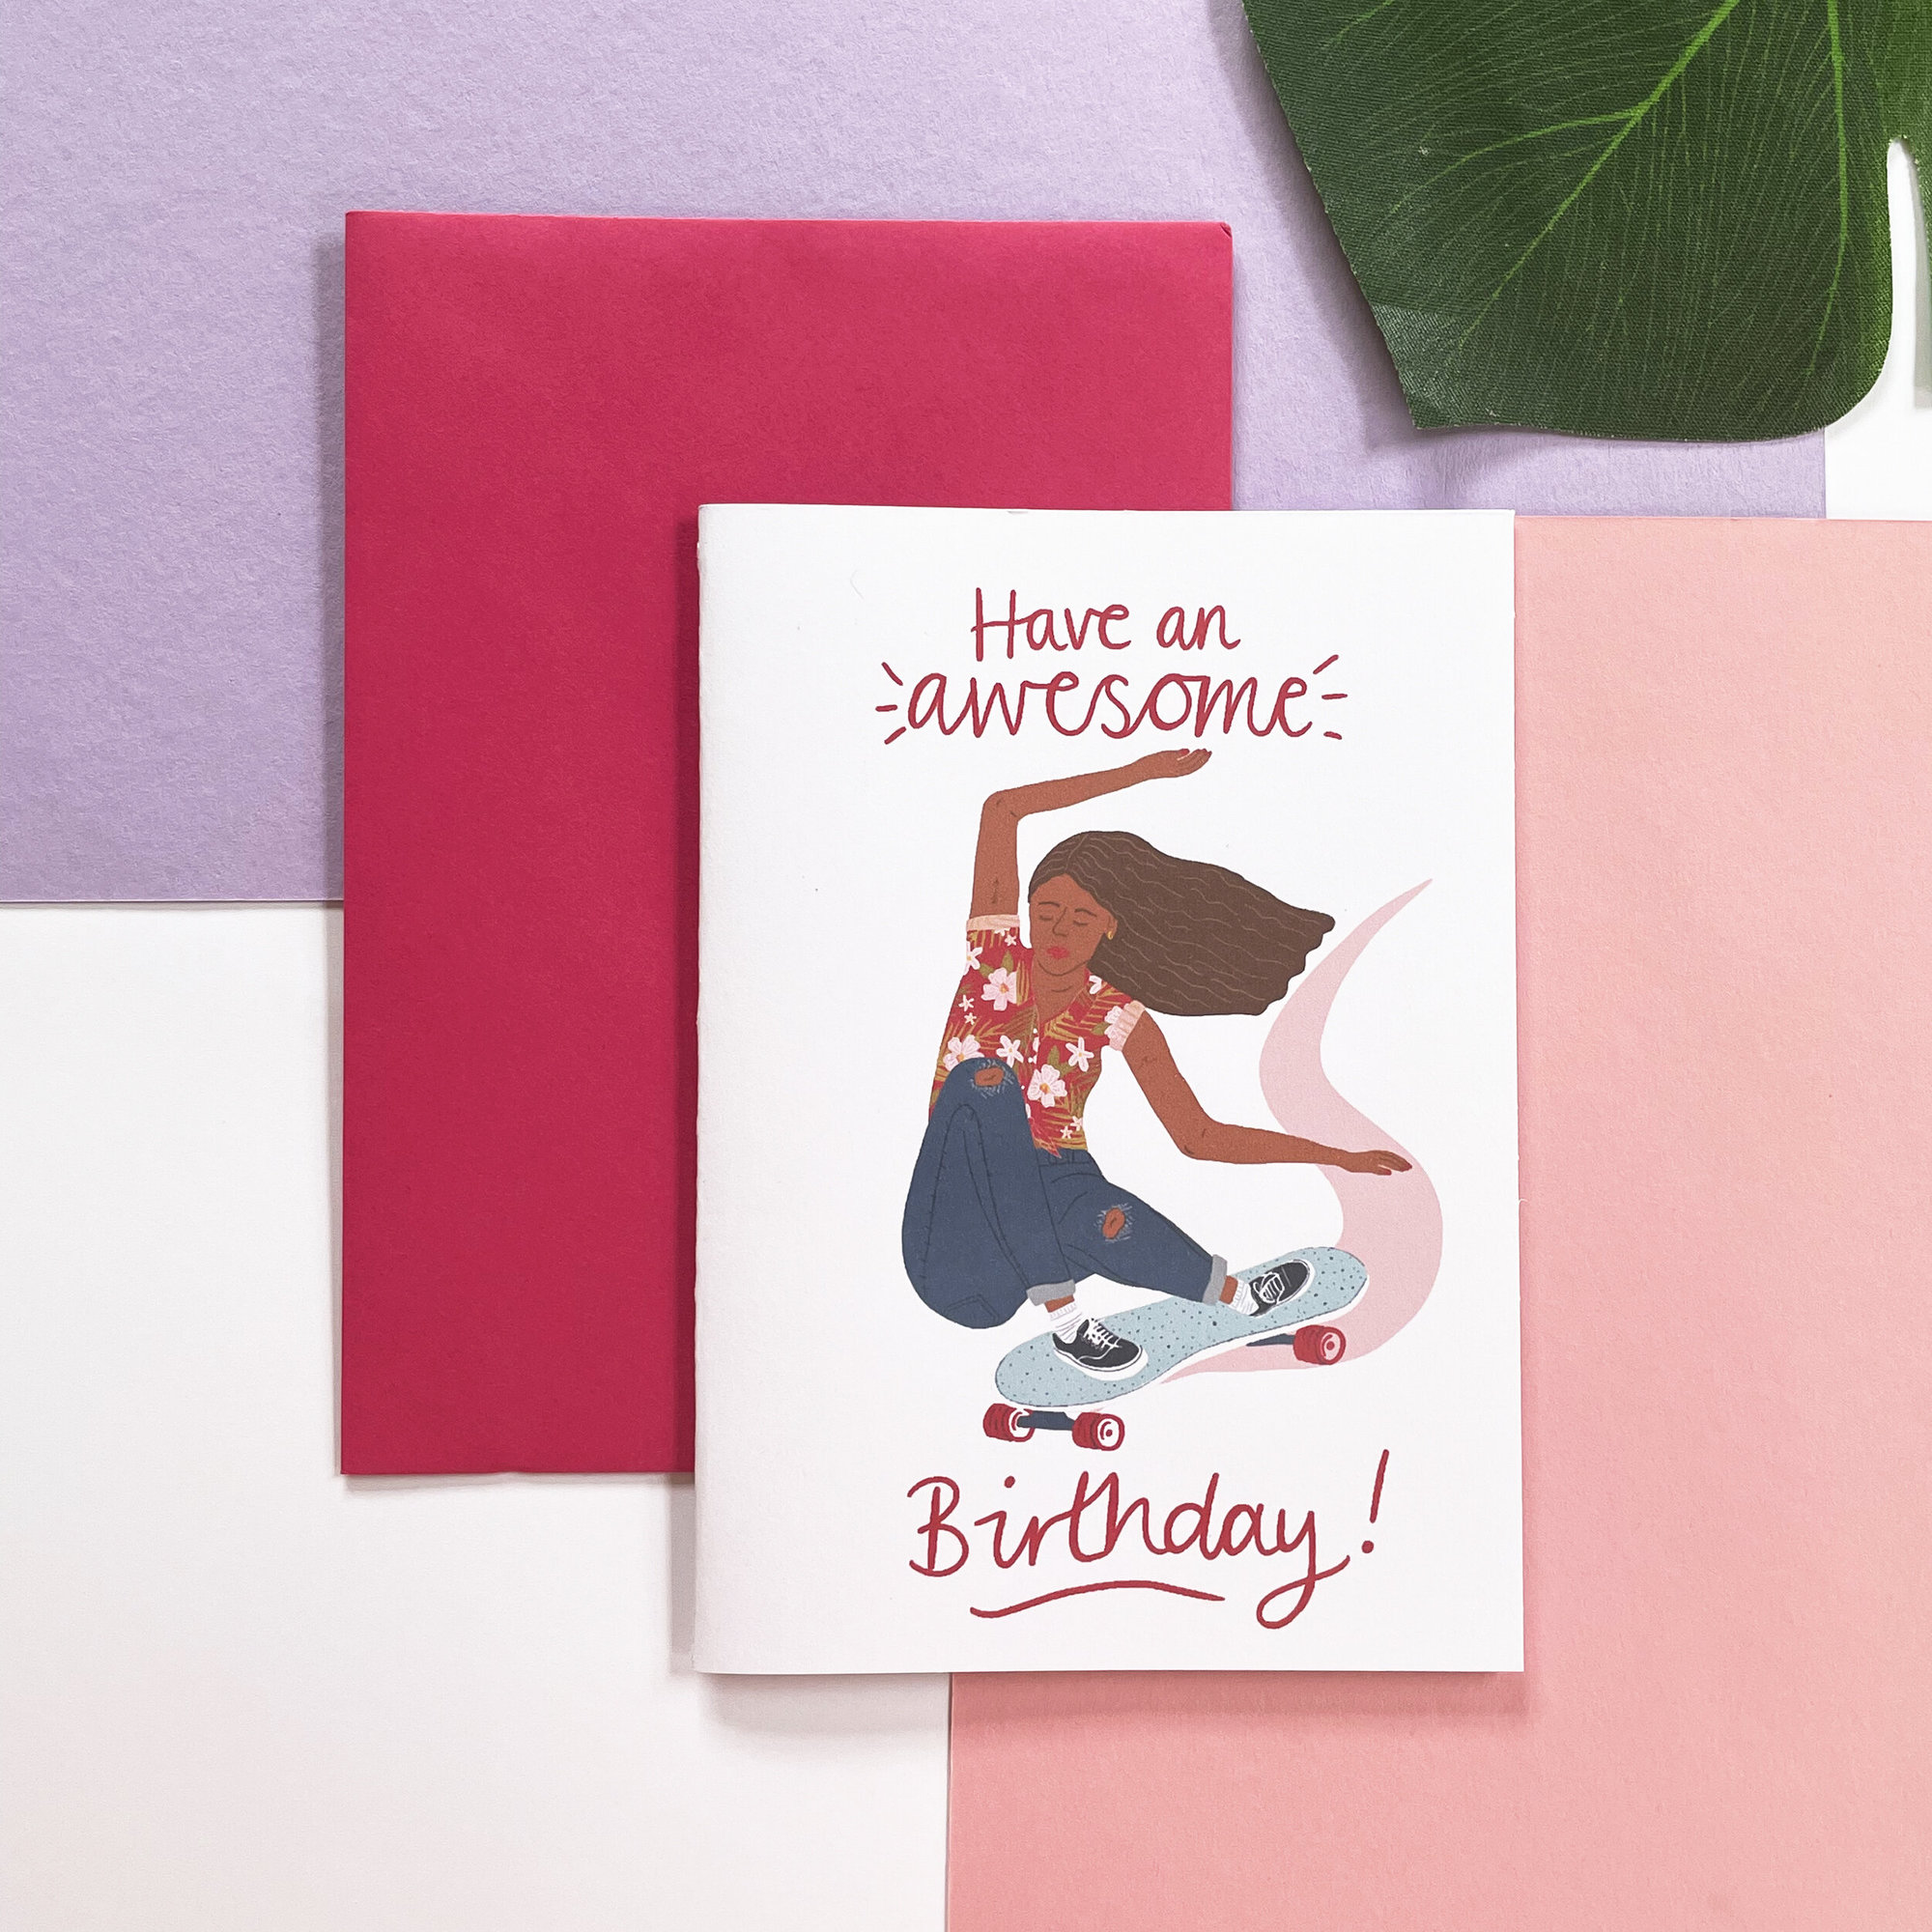 'have An Awesome Birthday!'
Skater Girl Card - Just the card, Standard Envelope